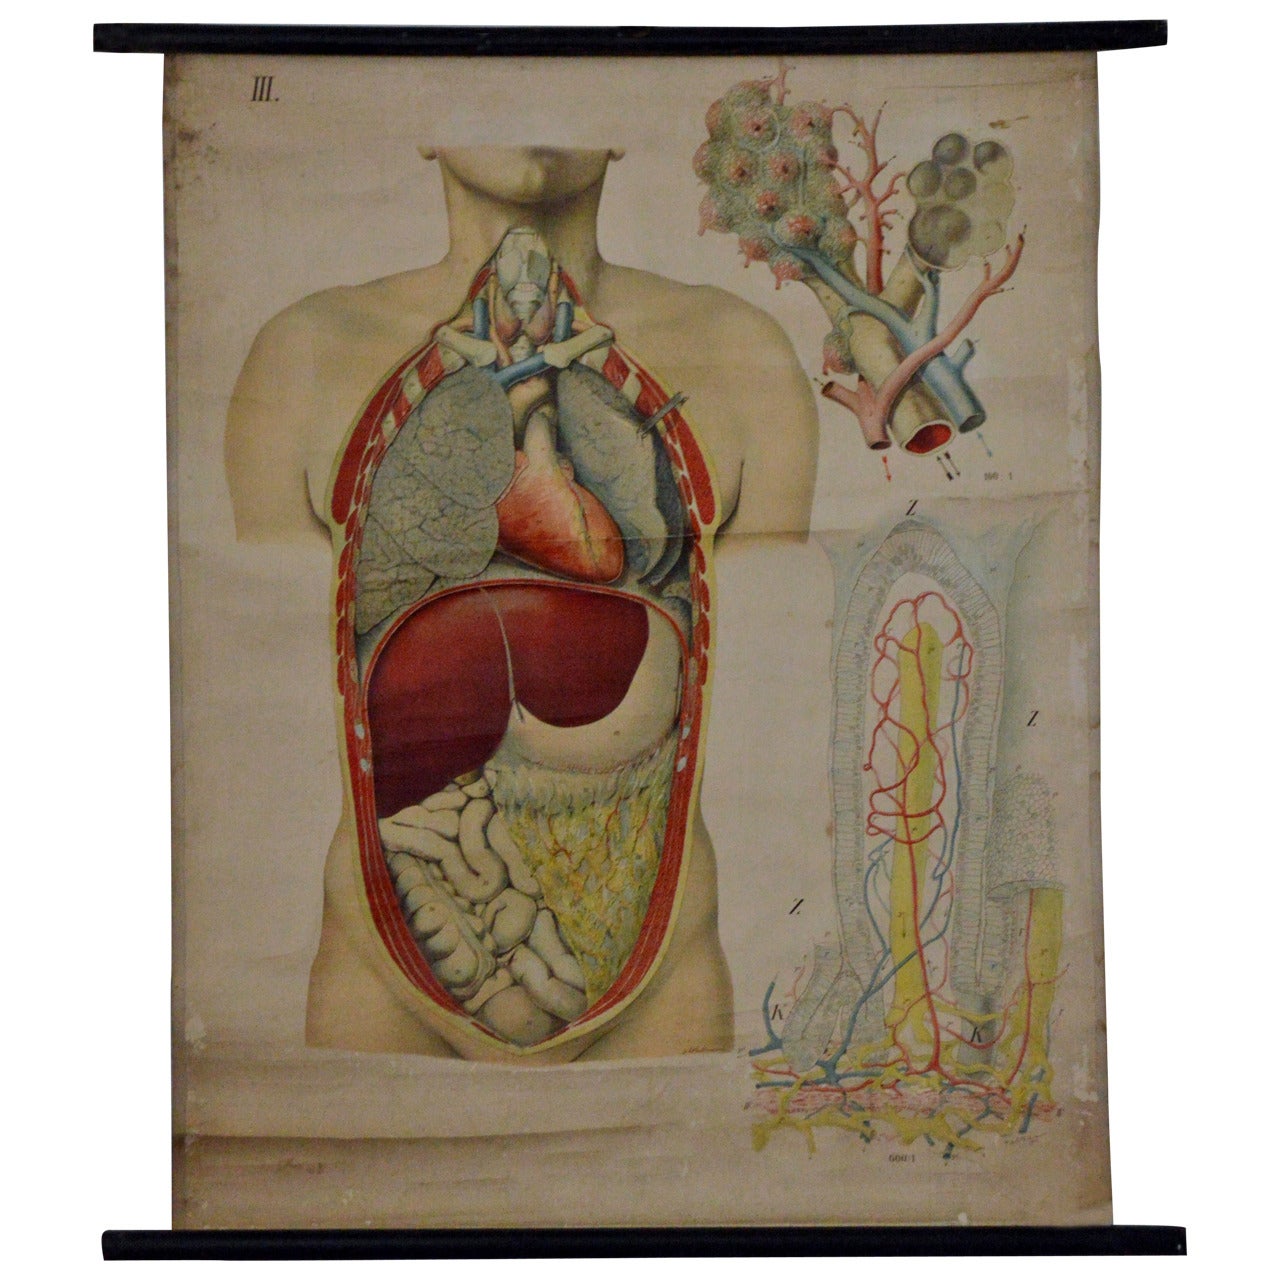 Antique Anatomical Chart Architecture of the Human Anatomy by E. Hoelemann For Sale